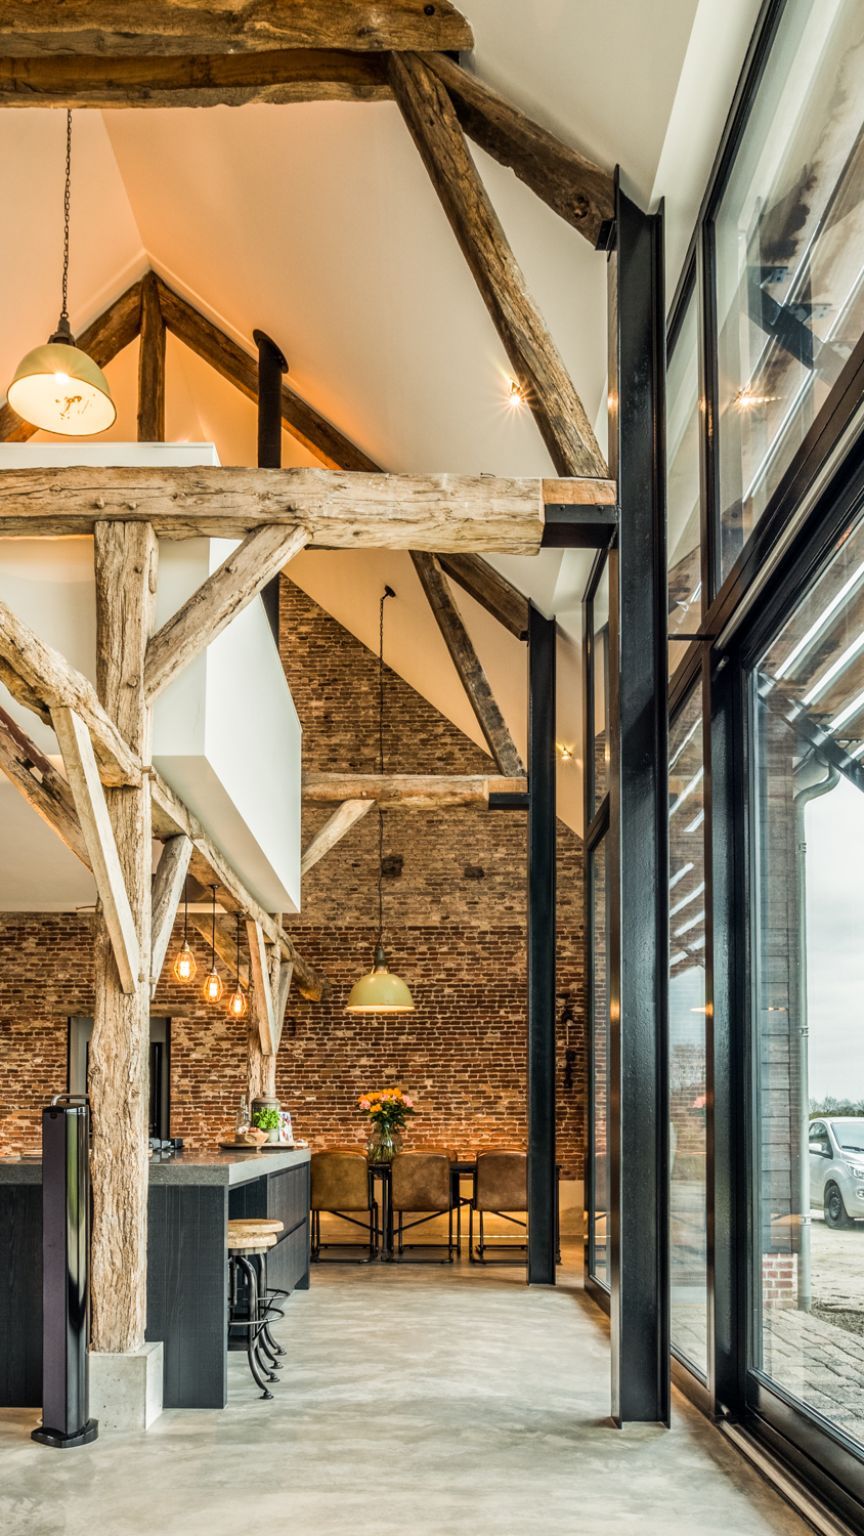 The wooden beams and brick wall give the house a rustic-industrial vibe and make it feel extra warm and cozy